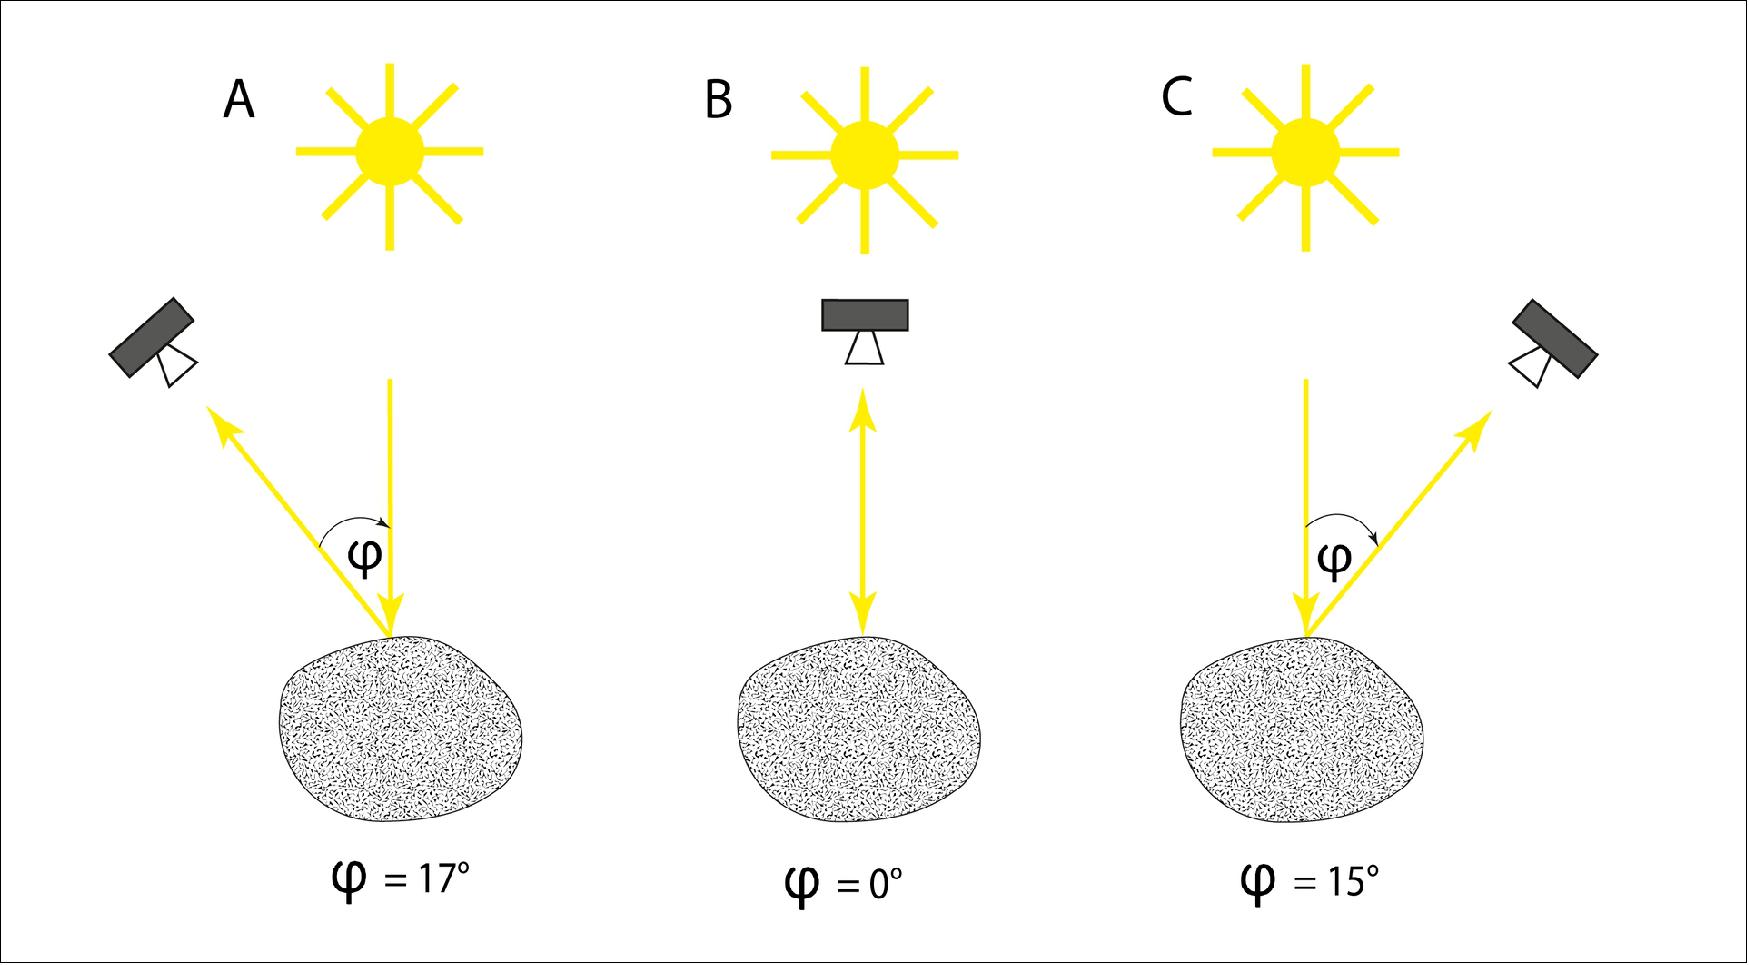 Figure 3: This schematic accompanies a new sequence of Phobos images, created as the small martian moon passed in front of ESA's Mars Express. The images were captured at different phase angles. The phase angle (marked as 'ϕ' in the graphic) is the angle between a light source (in this case, the Sun) and the observer (Mars Express), as viewed from the target object itself (Phobos). In the movie of Phobos, the initial phase angle is 17 degrees (A), drops to almost zero degrees mid-way through (when Phobos is at its brightest, B), and then rises to 15 degrees by the end of the animation (B), image credit: DLR